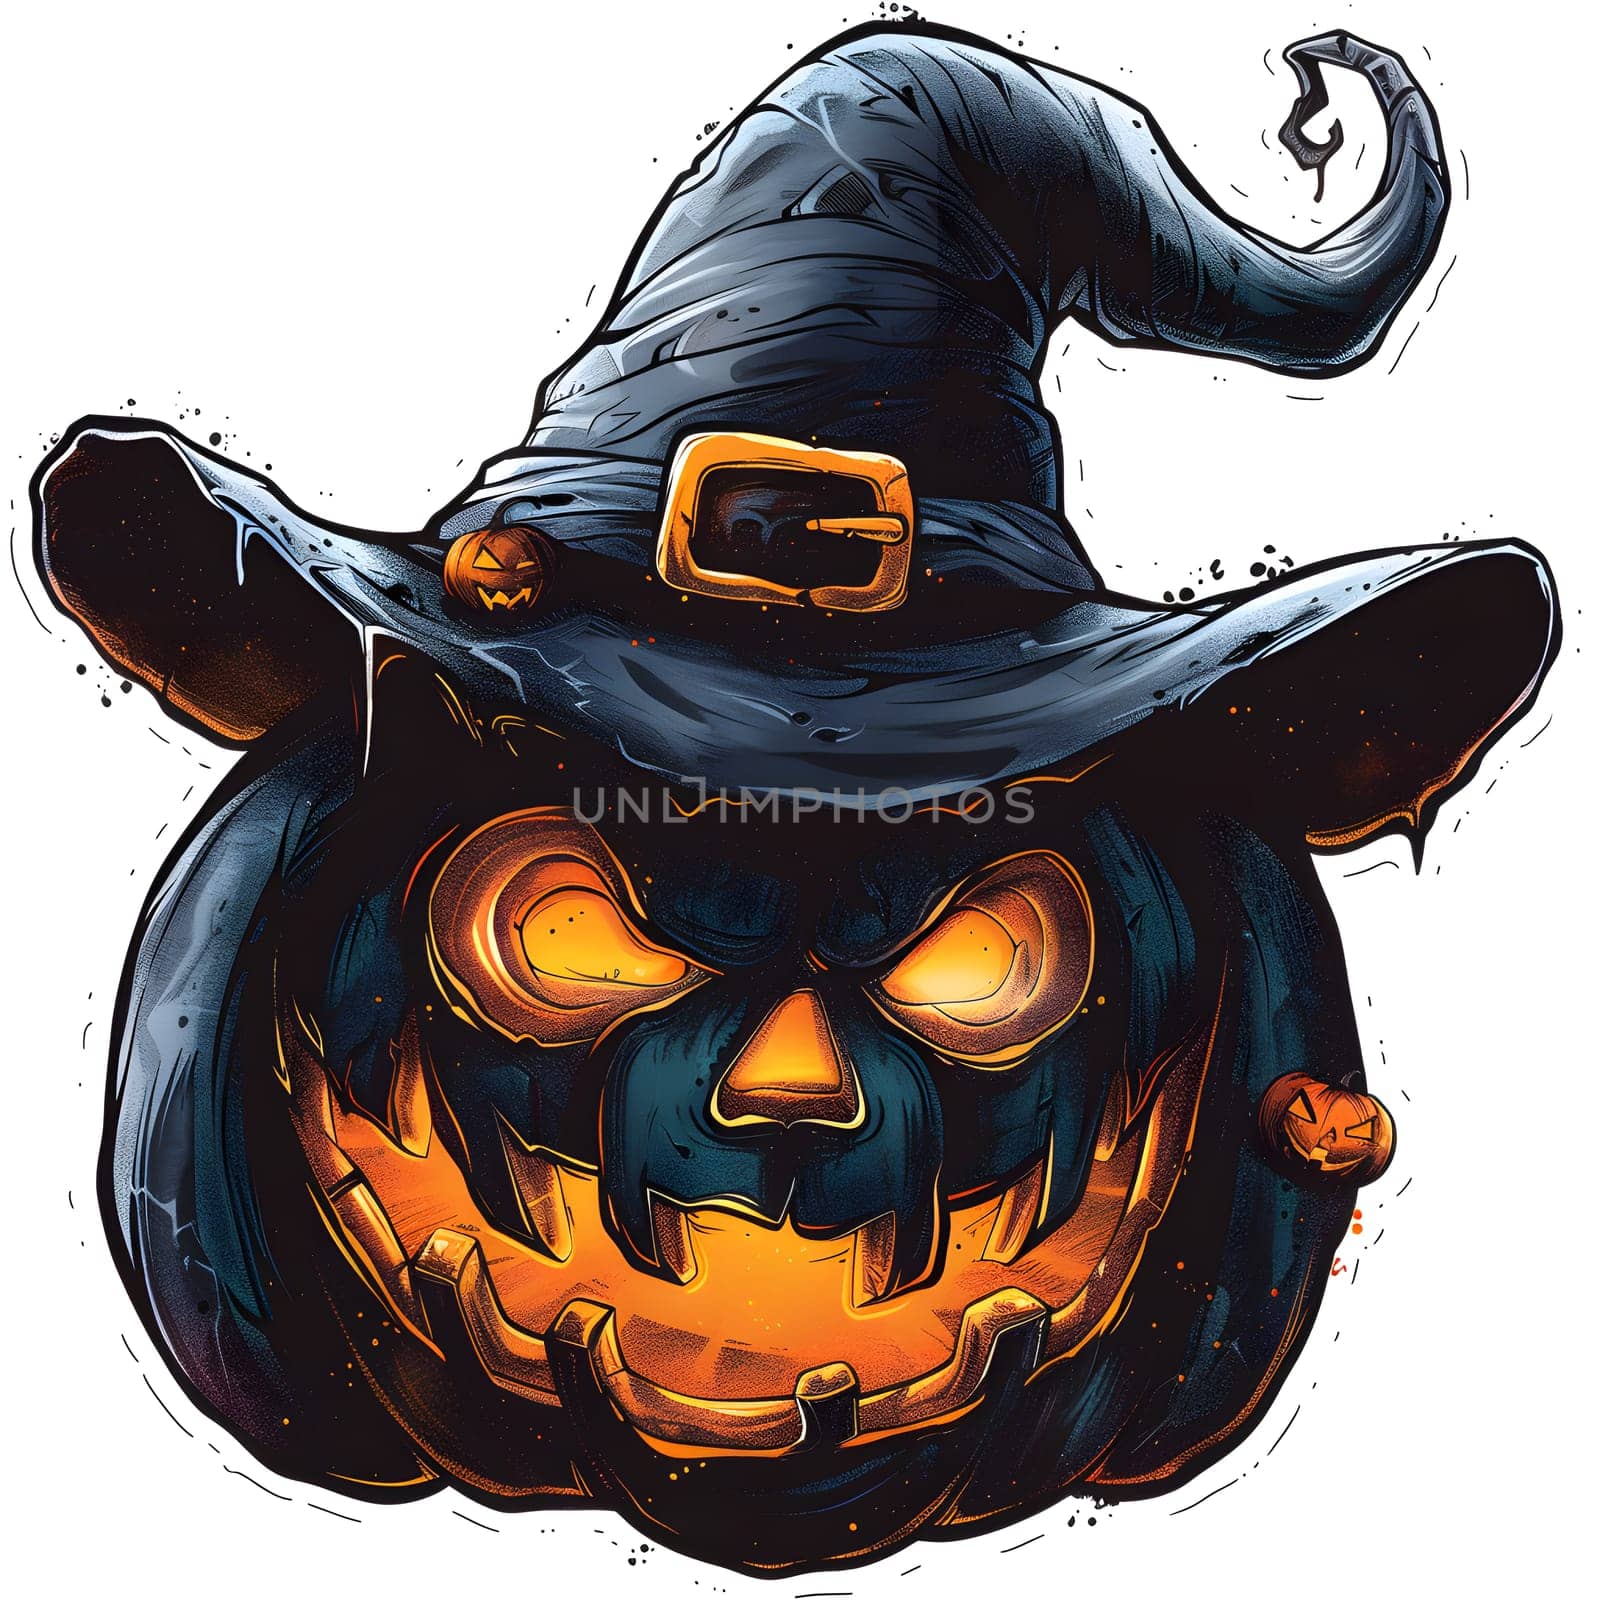 A pumpkin with a witch hat, painted onto it as part of an art project by Nadtochiy